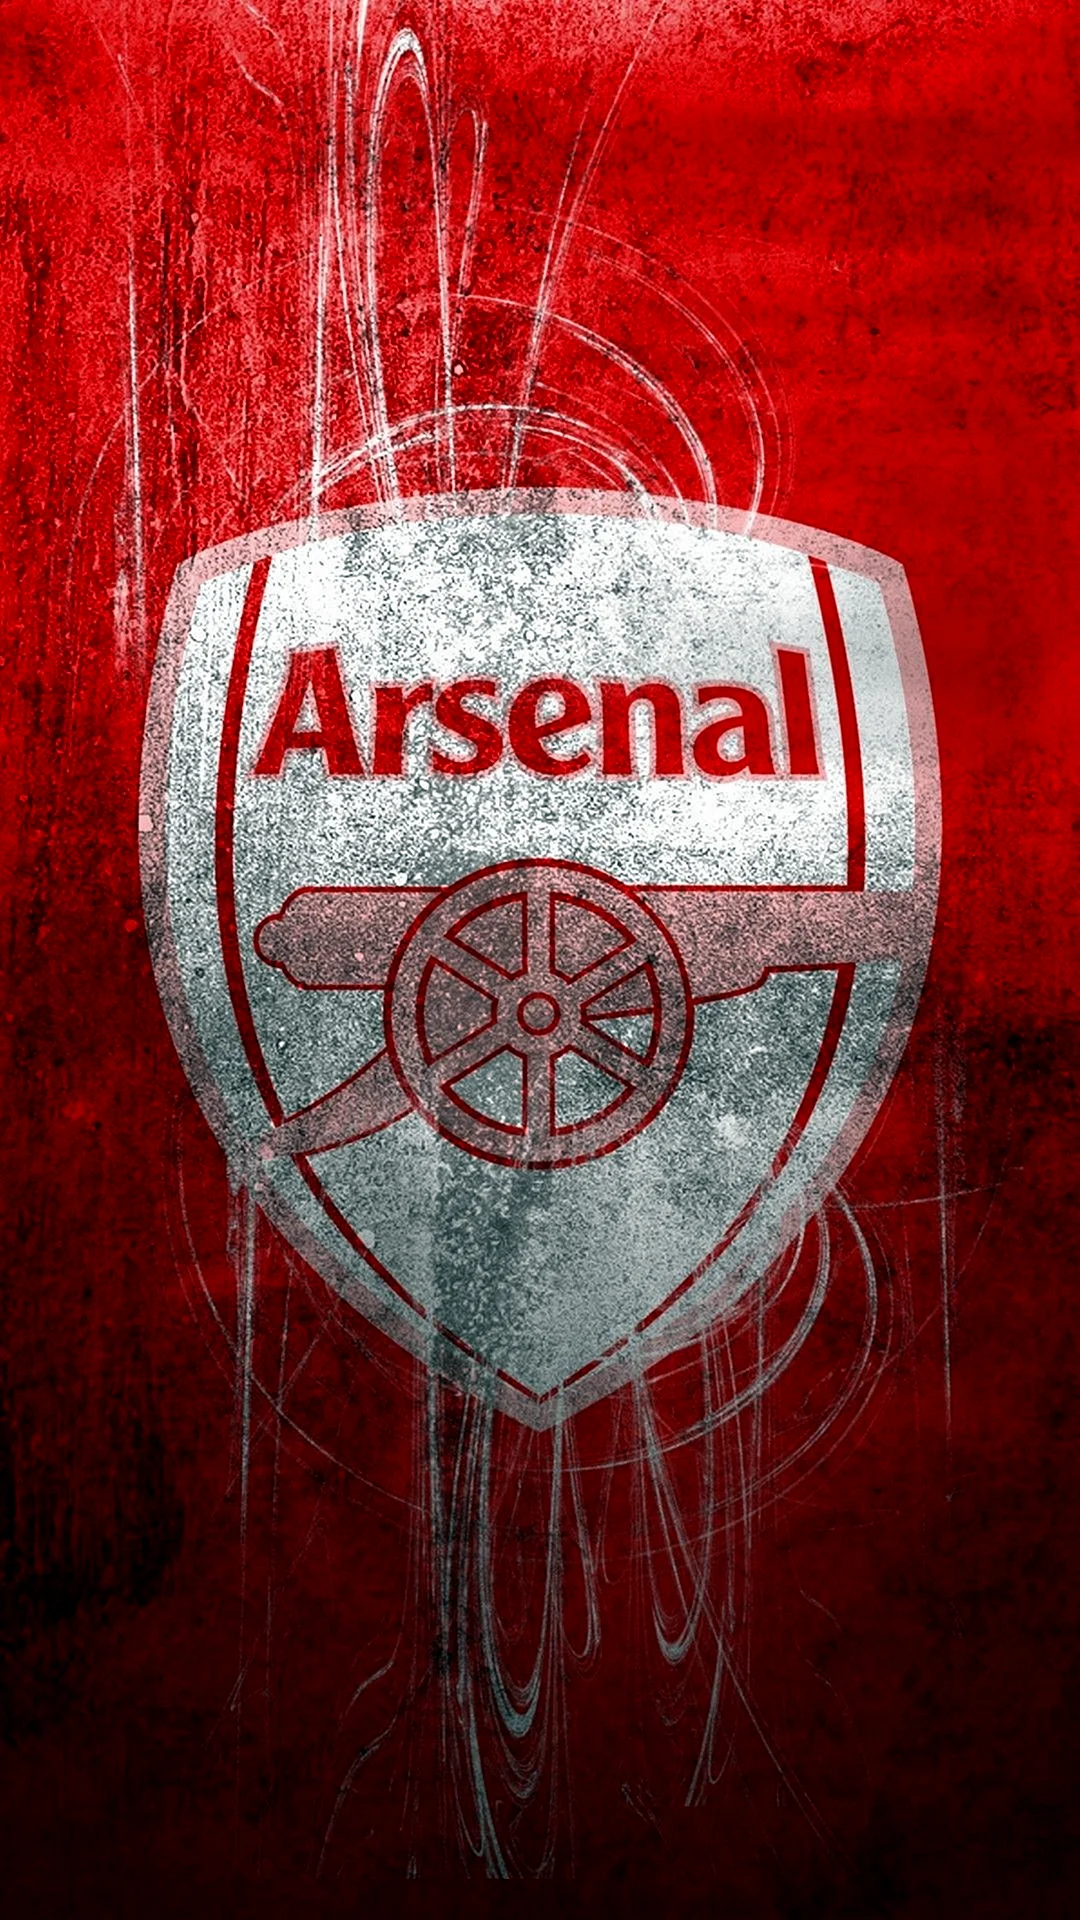 Arsenal Wallpaper For iPhone